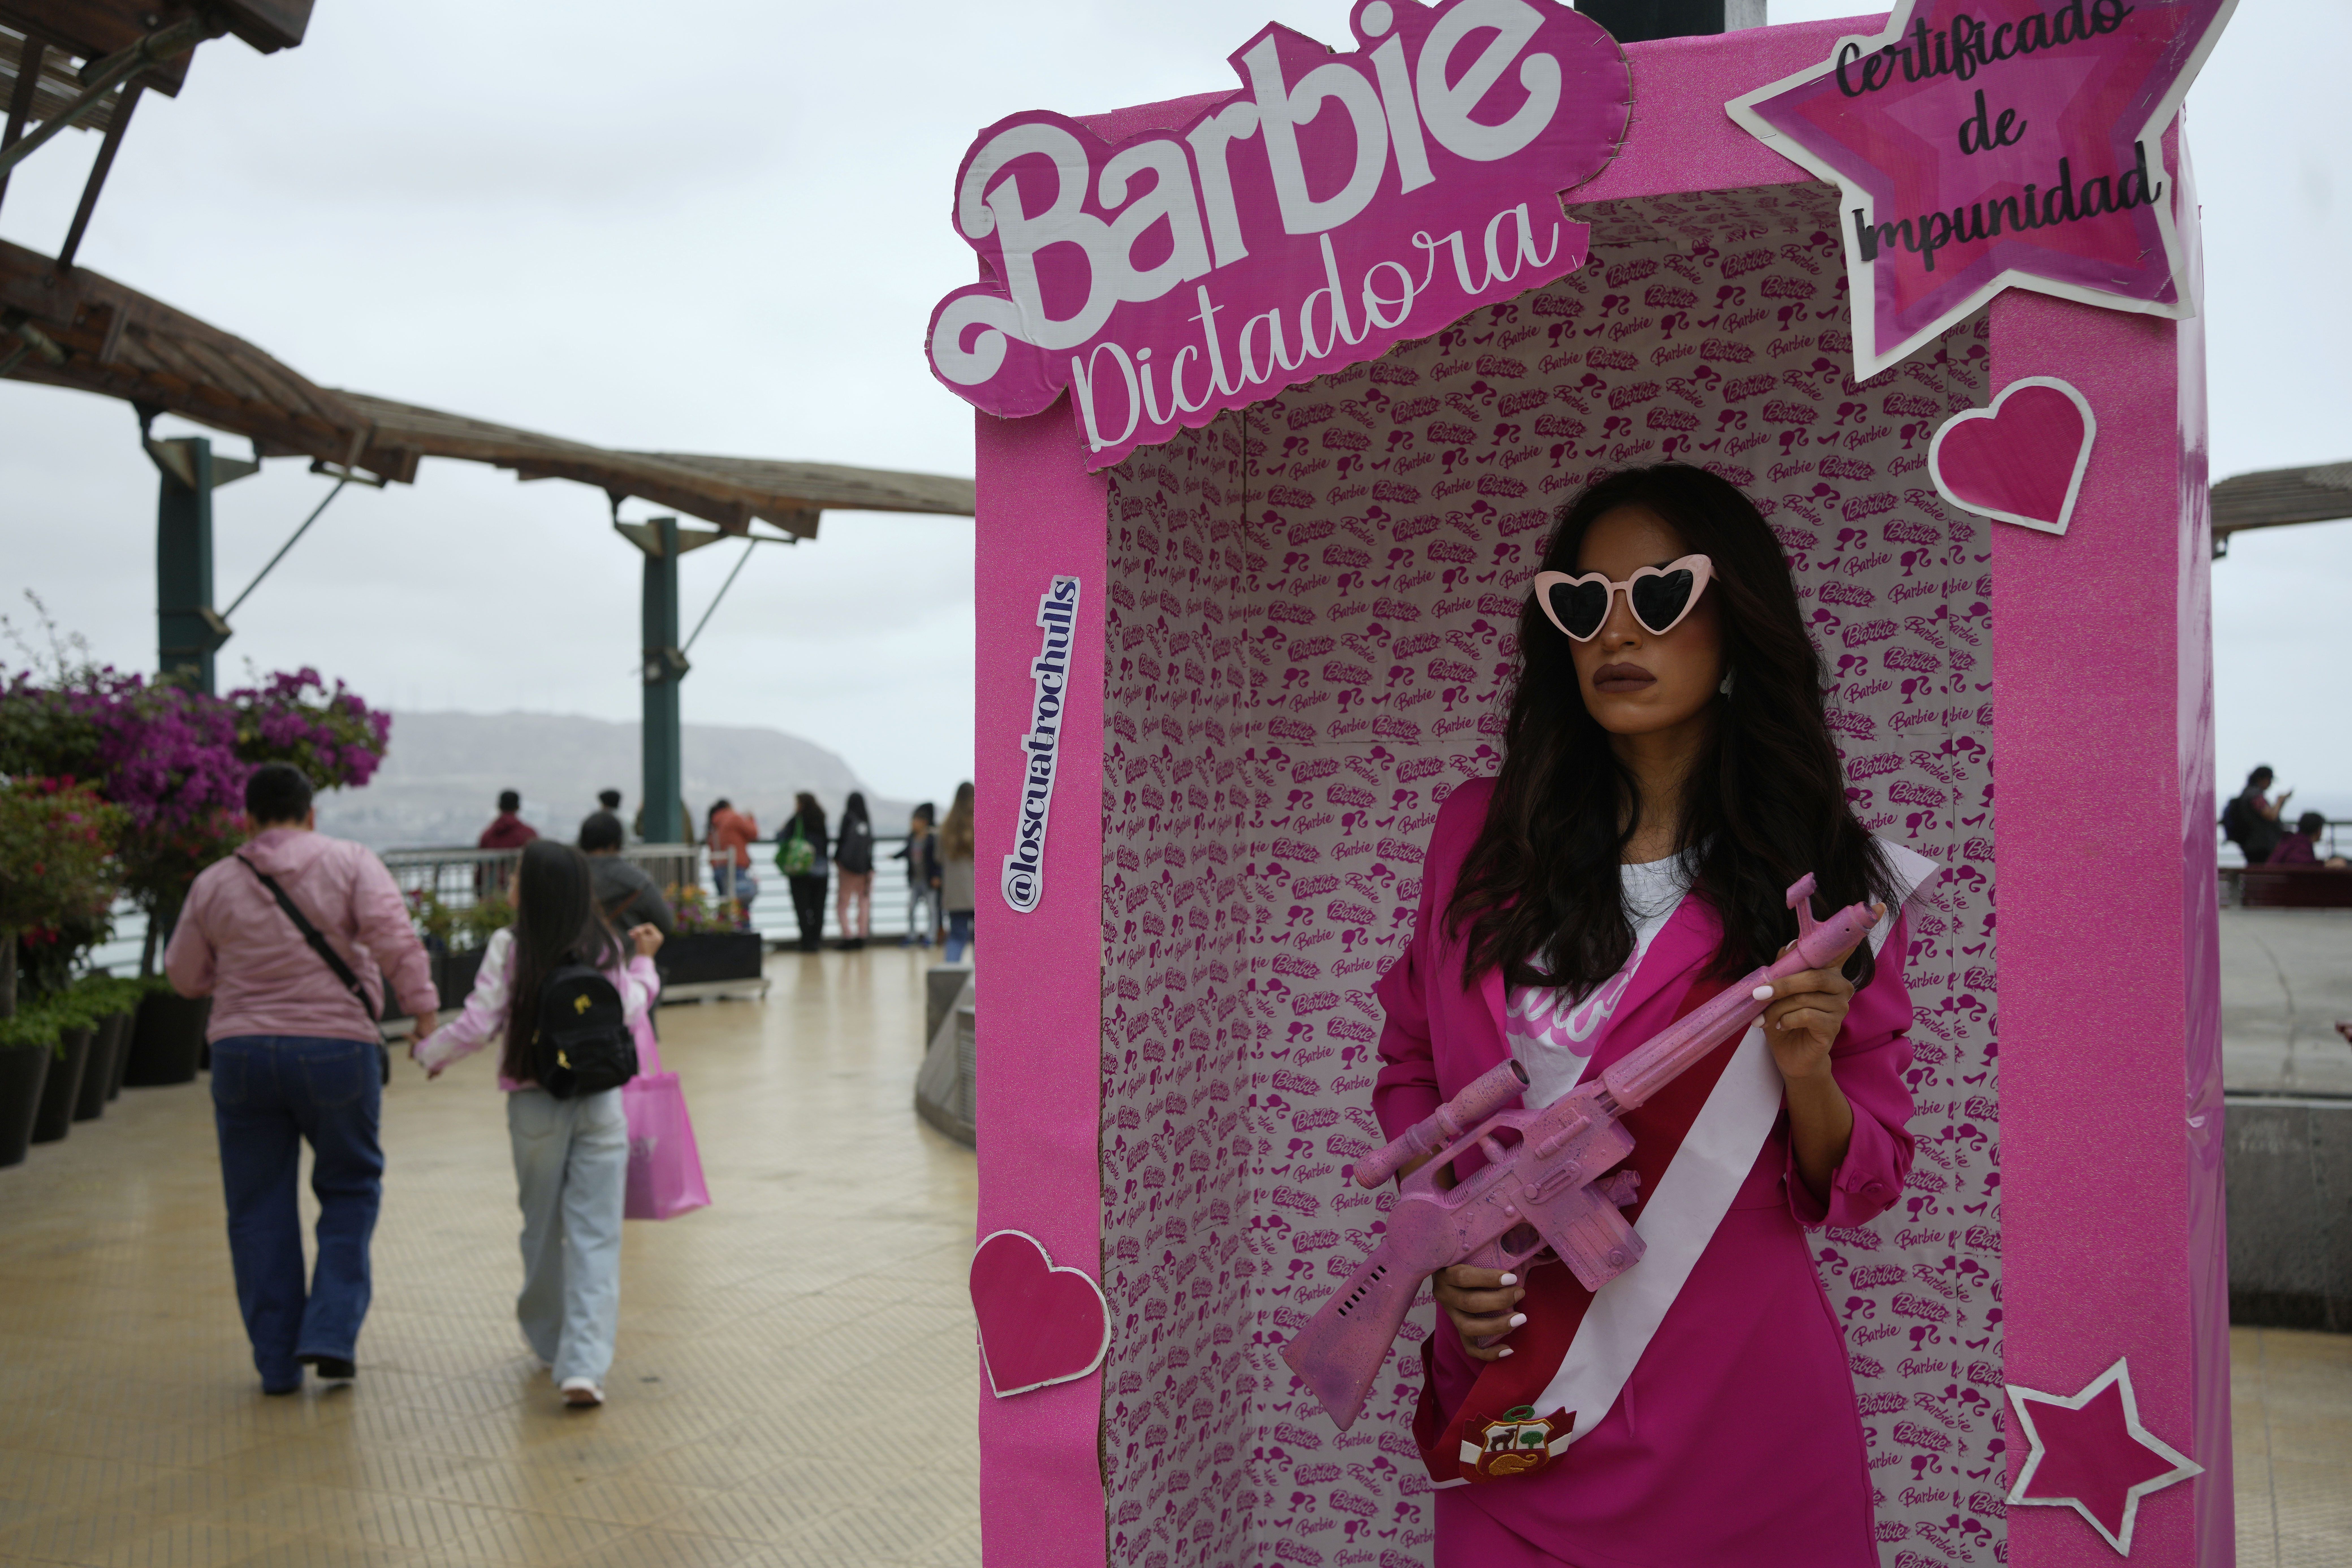 Barbie mania sweeps Latin America, but sometimes takes on a macabre tone